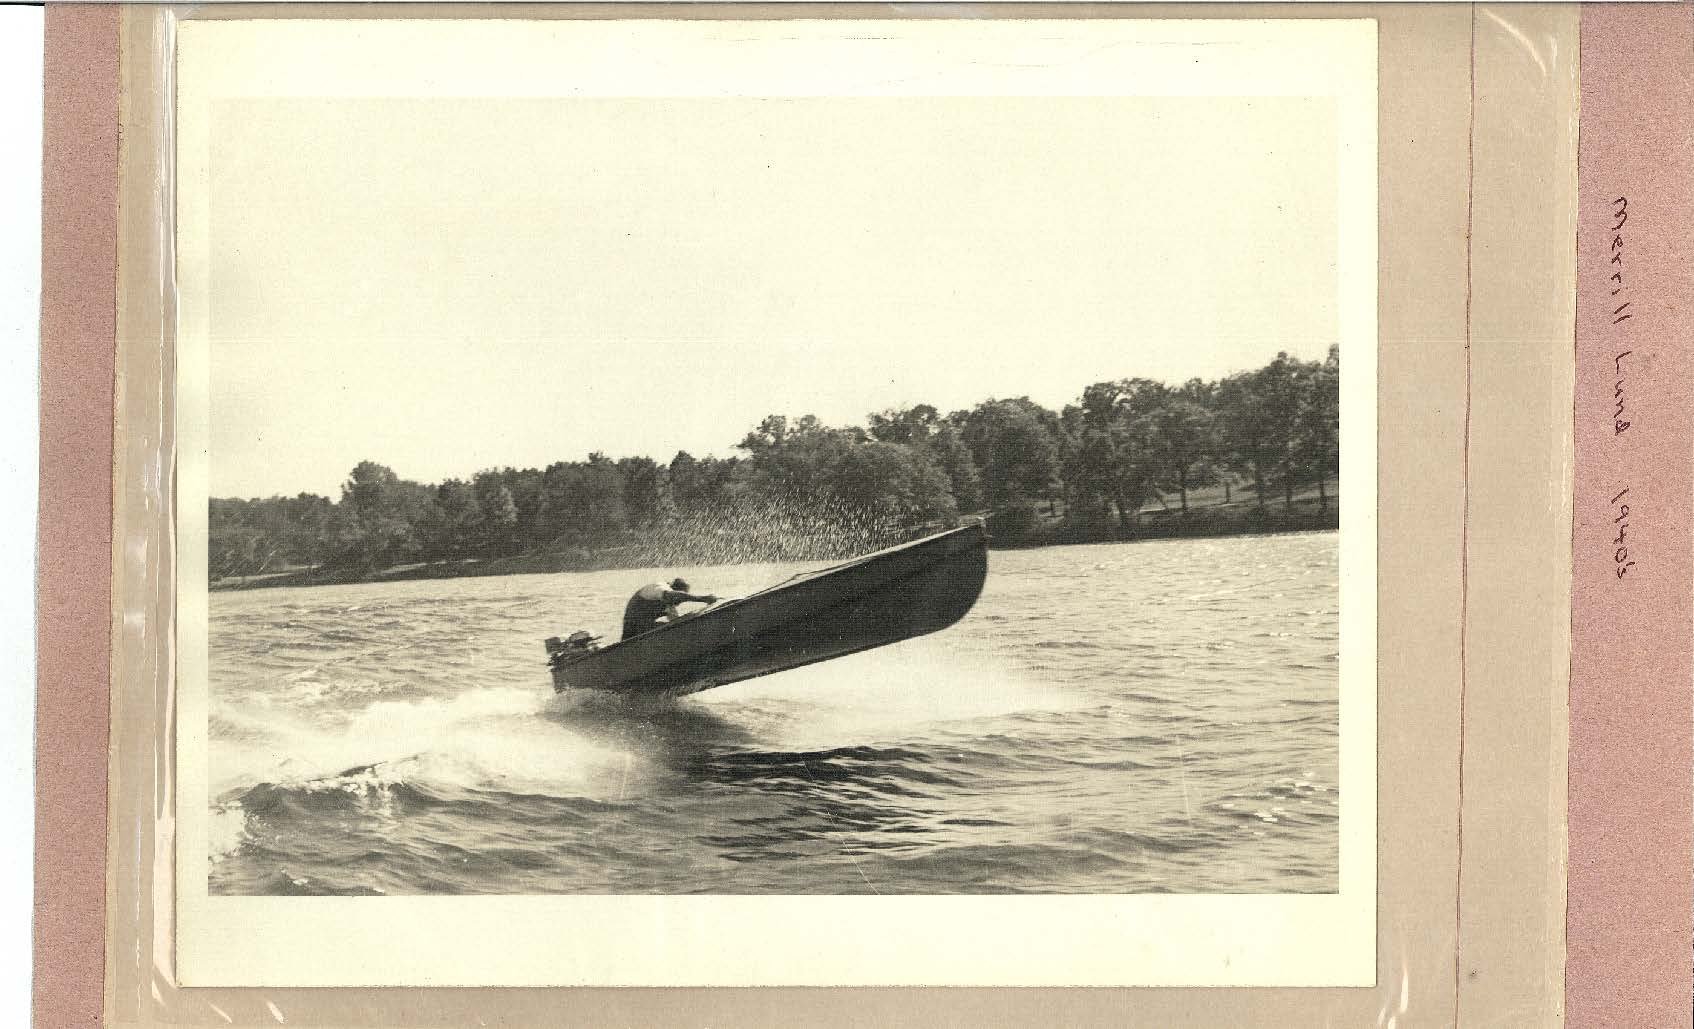 Photo "Merrill Lund 1940's" shows small race boat coming on plane